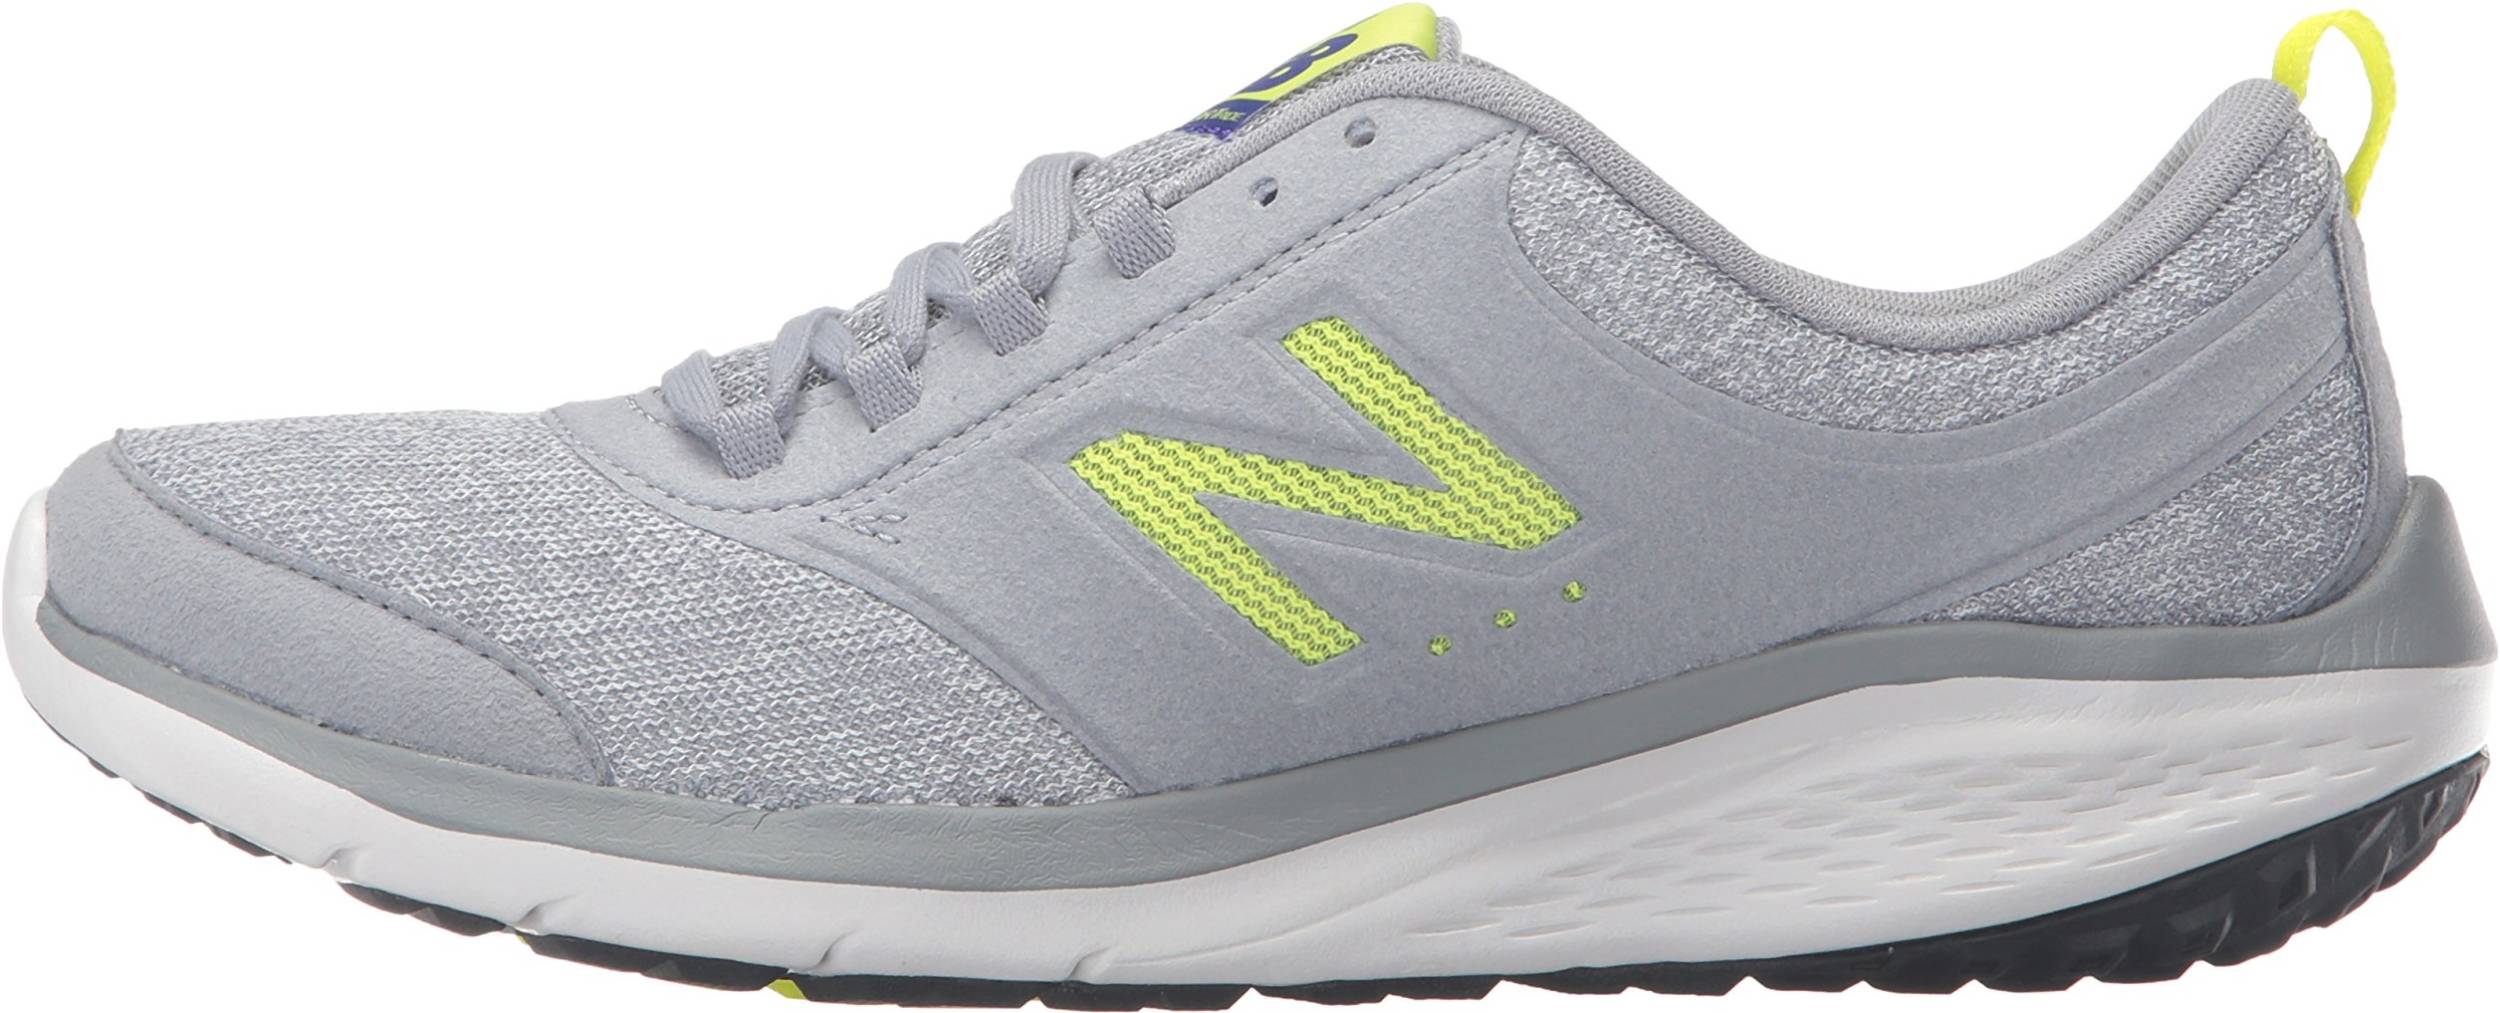 top rated new balance walking shoes